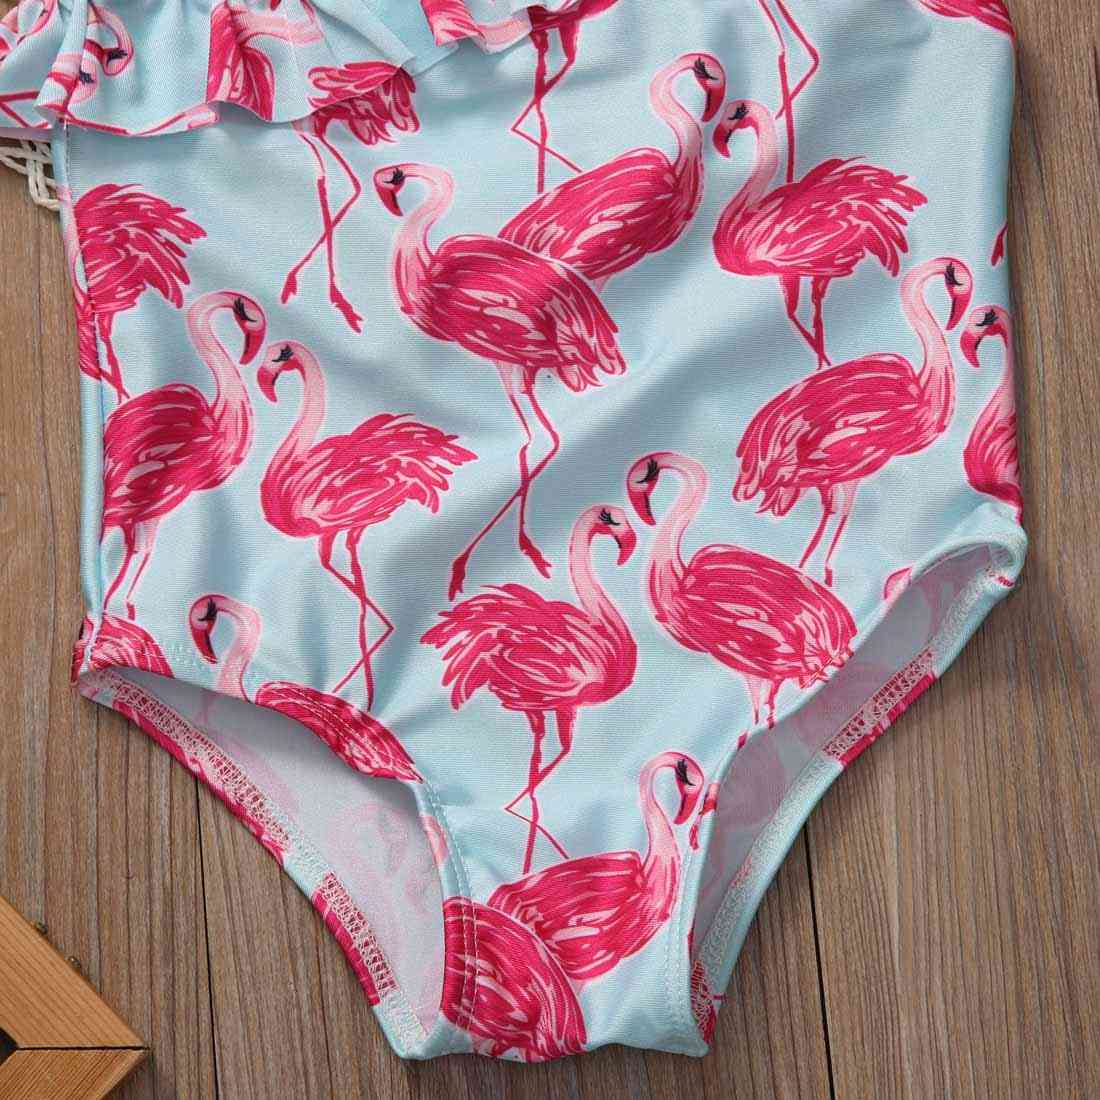 Swimming Bathing Suit For Baby